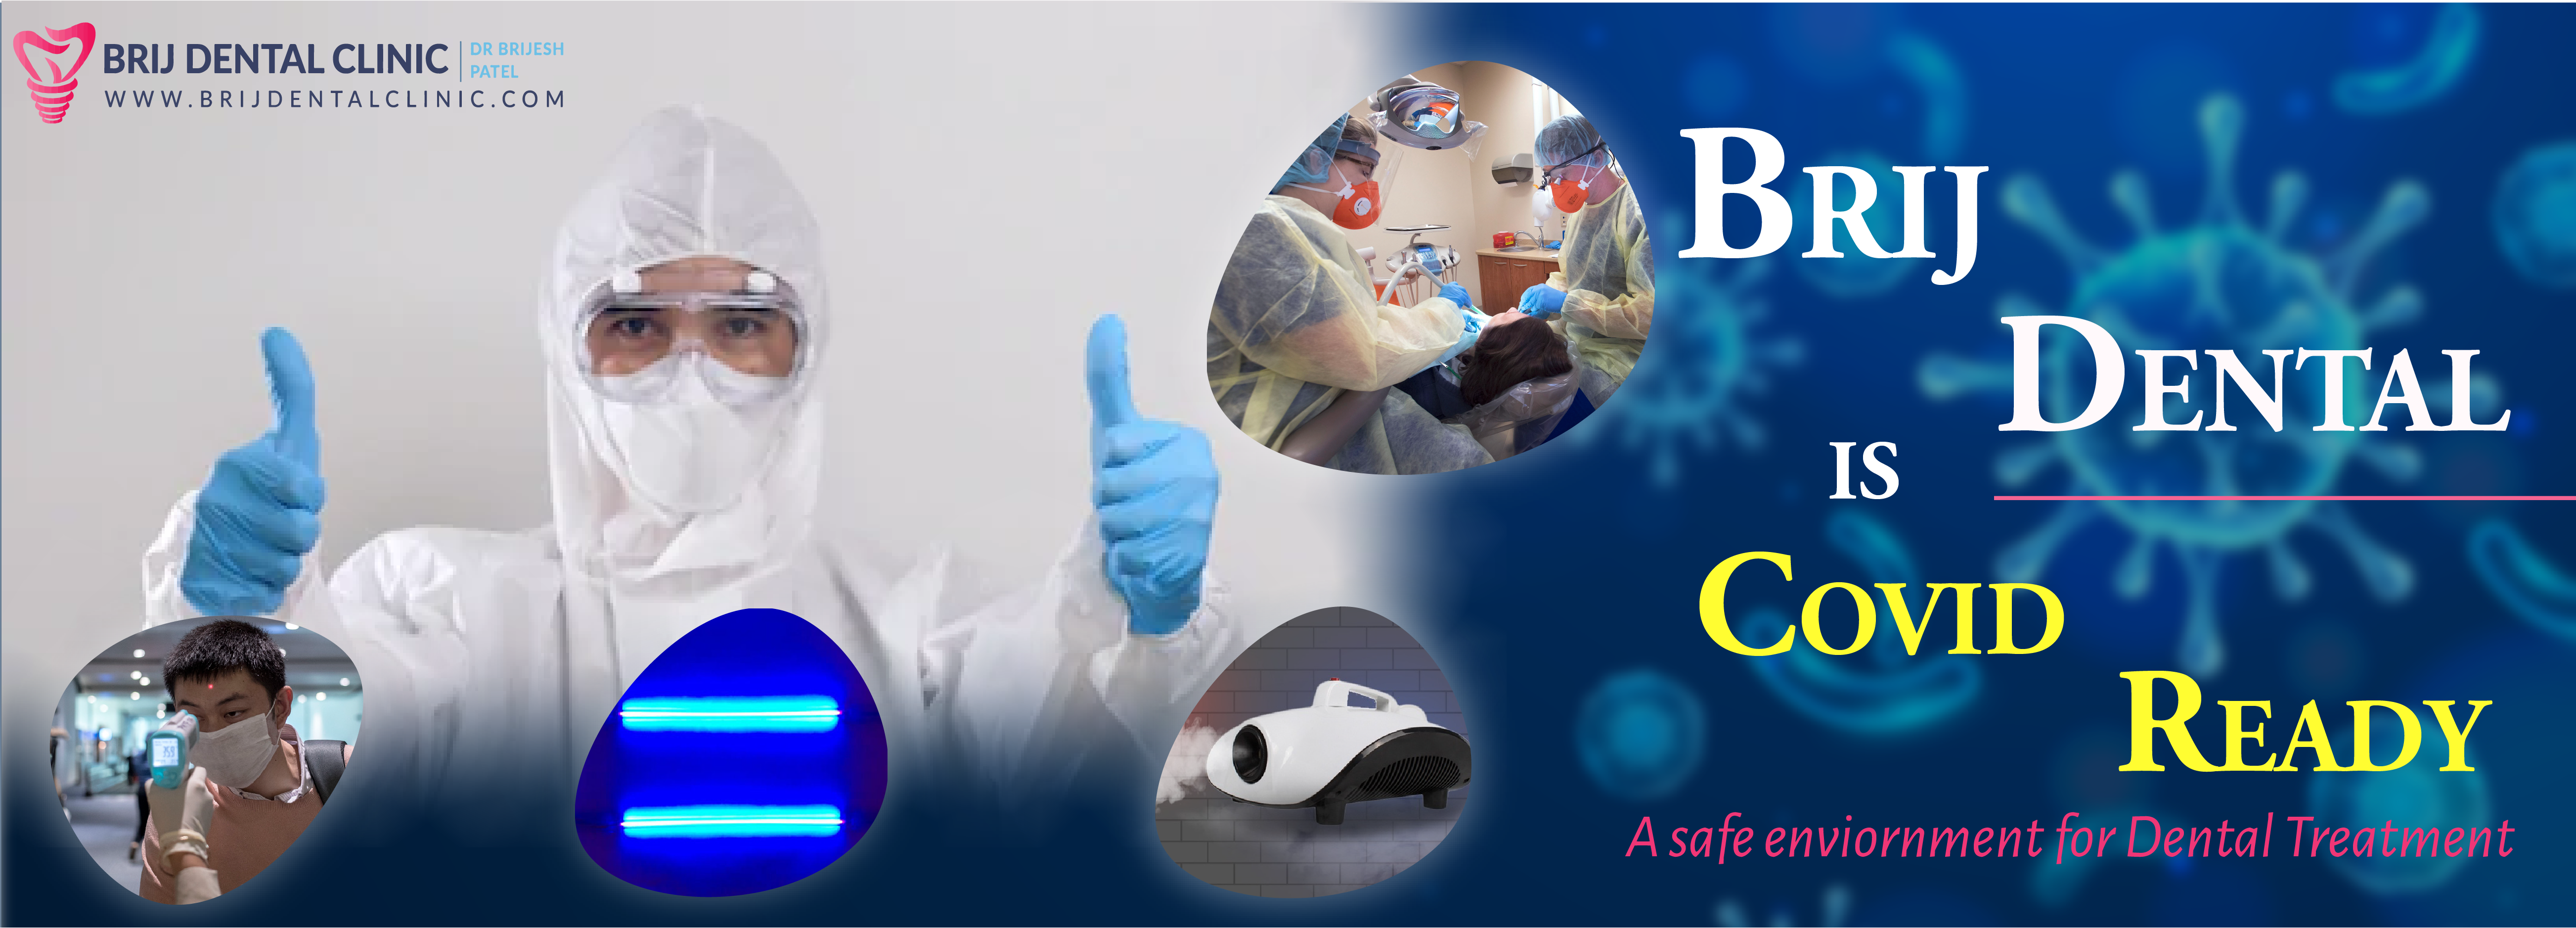 Brij Dental Clinic is Covid Ready, with all infection control protocol in ahmedabad india.